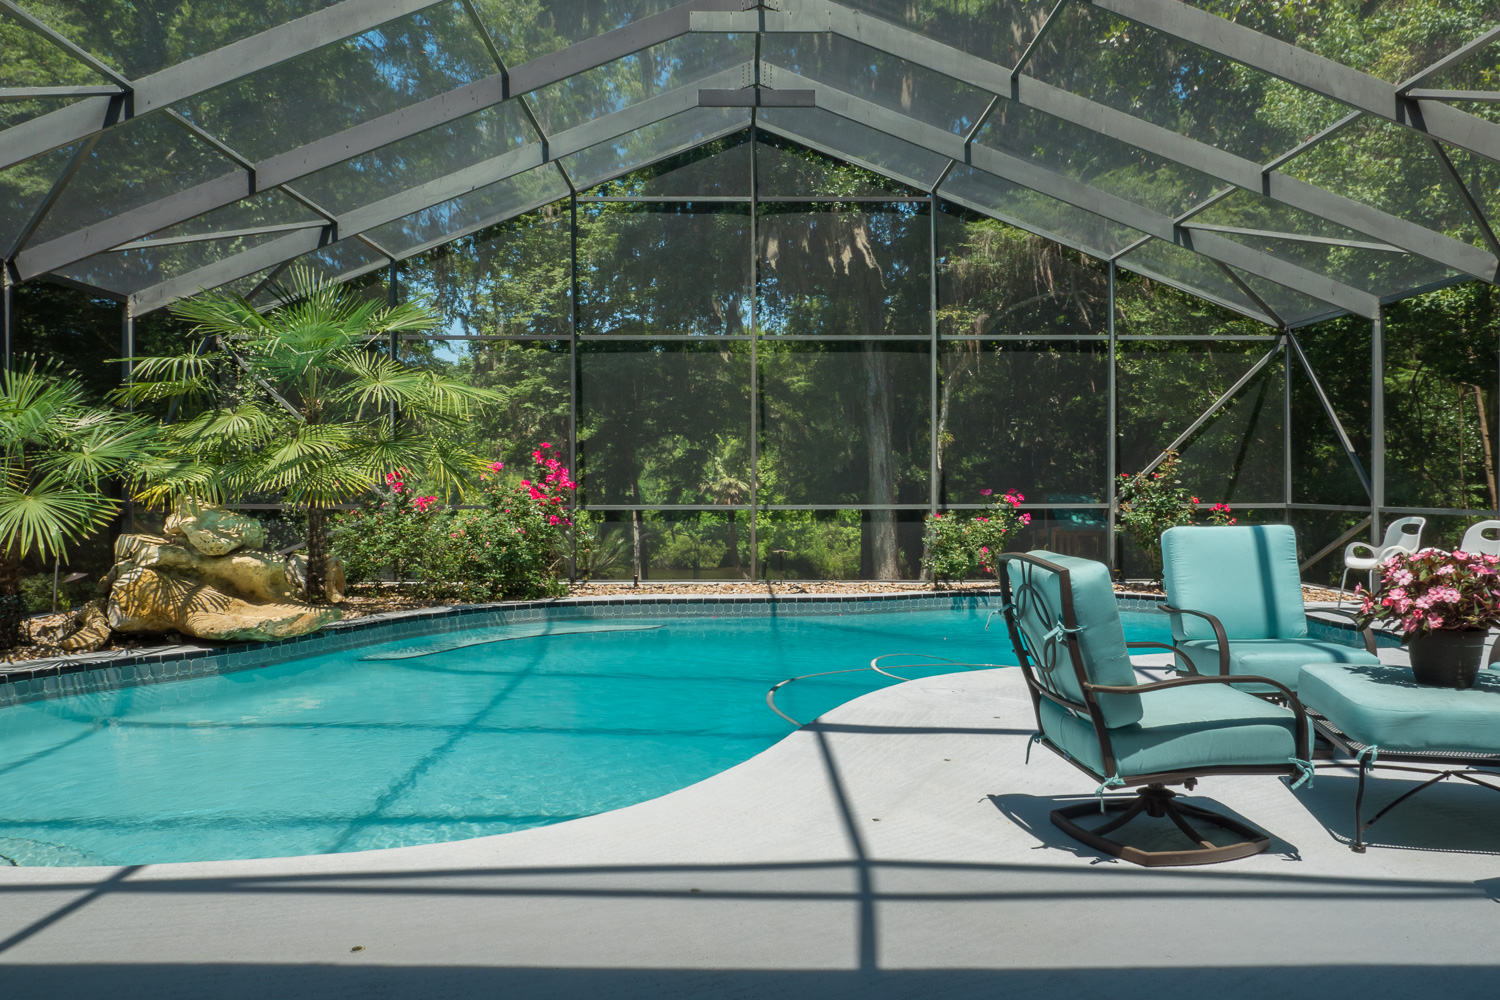 Lakeside pool home in The Hammock Gainesville FL